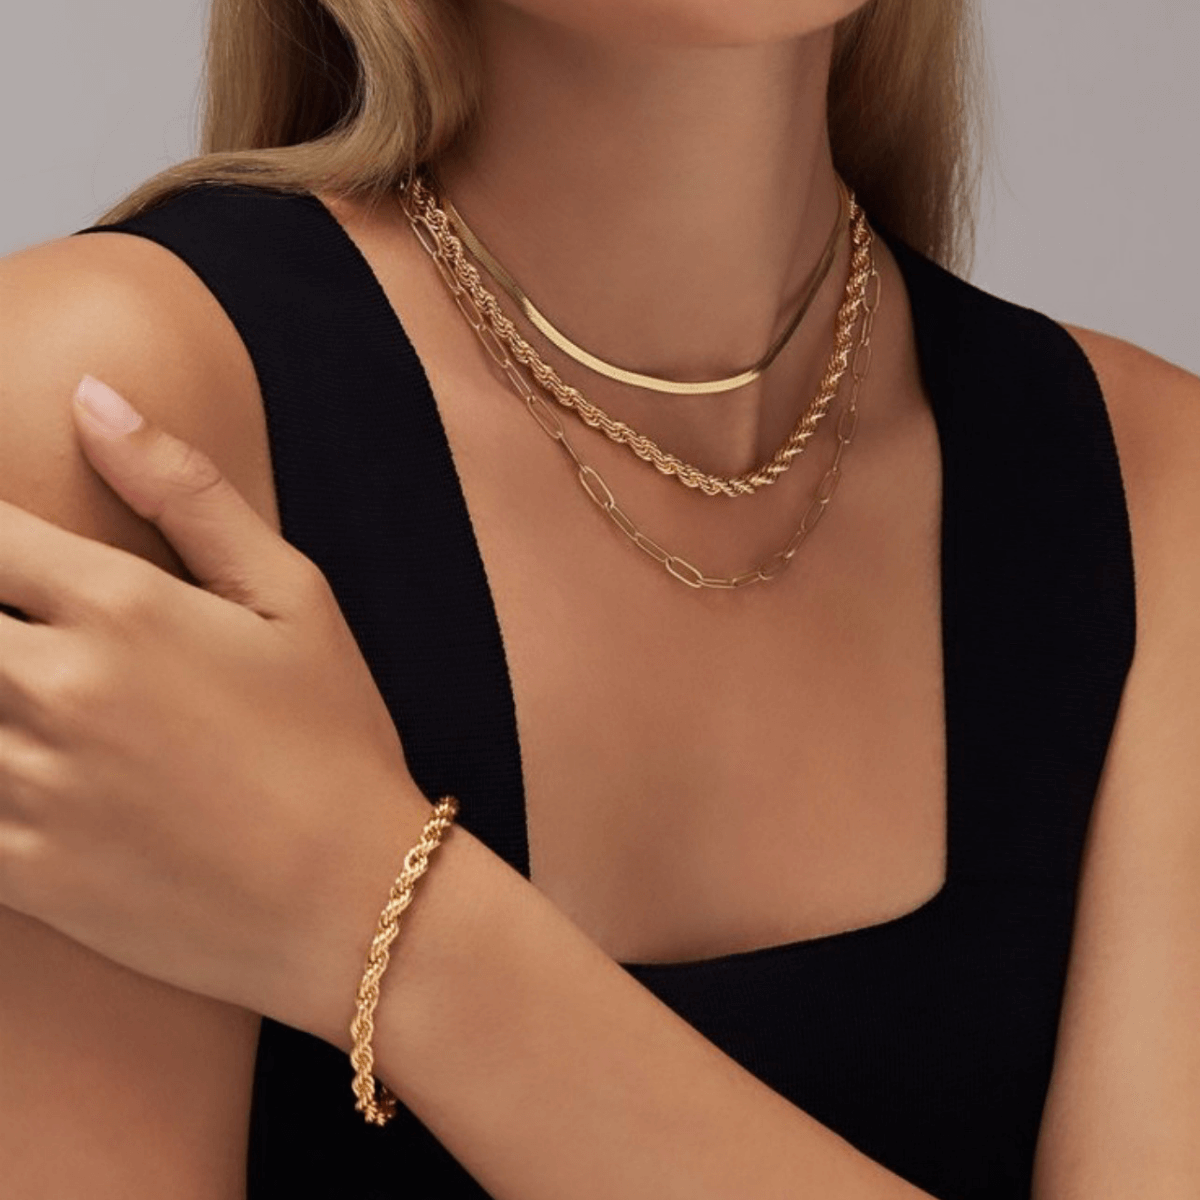 Best Gold Link Chain Necklace Jewelry Gift | Best Aesthetic Yellow Gold Chain Necklace Jewelry Gift for Women, Girls, Girlfriend, Mother, Wife